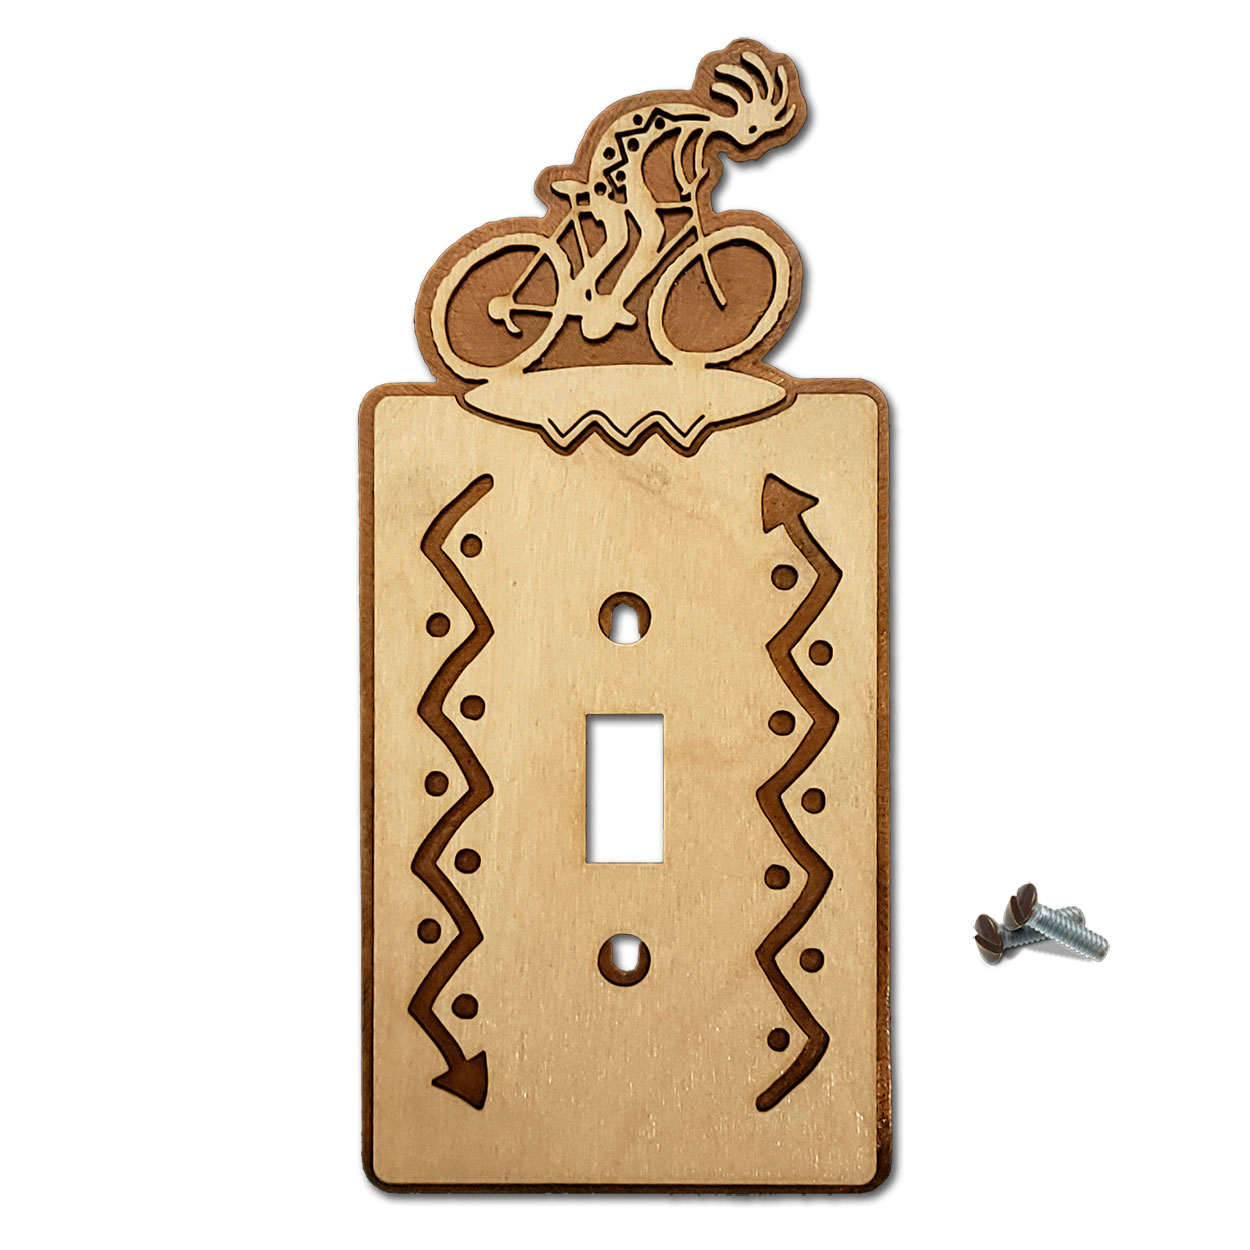 167511S - Bicyclist Cycling Theme Single Standard Switch Plate in Natural Birch